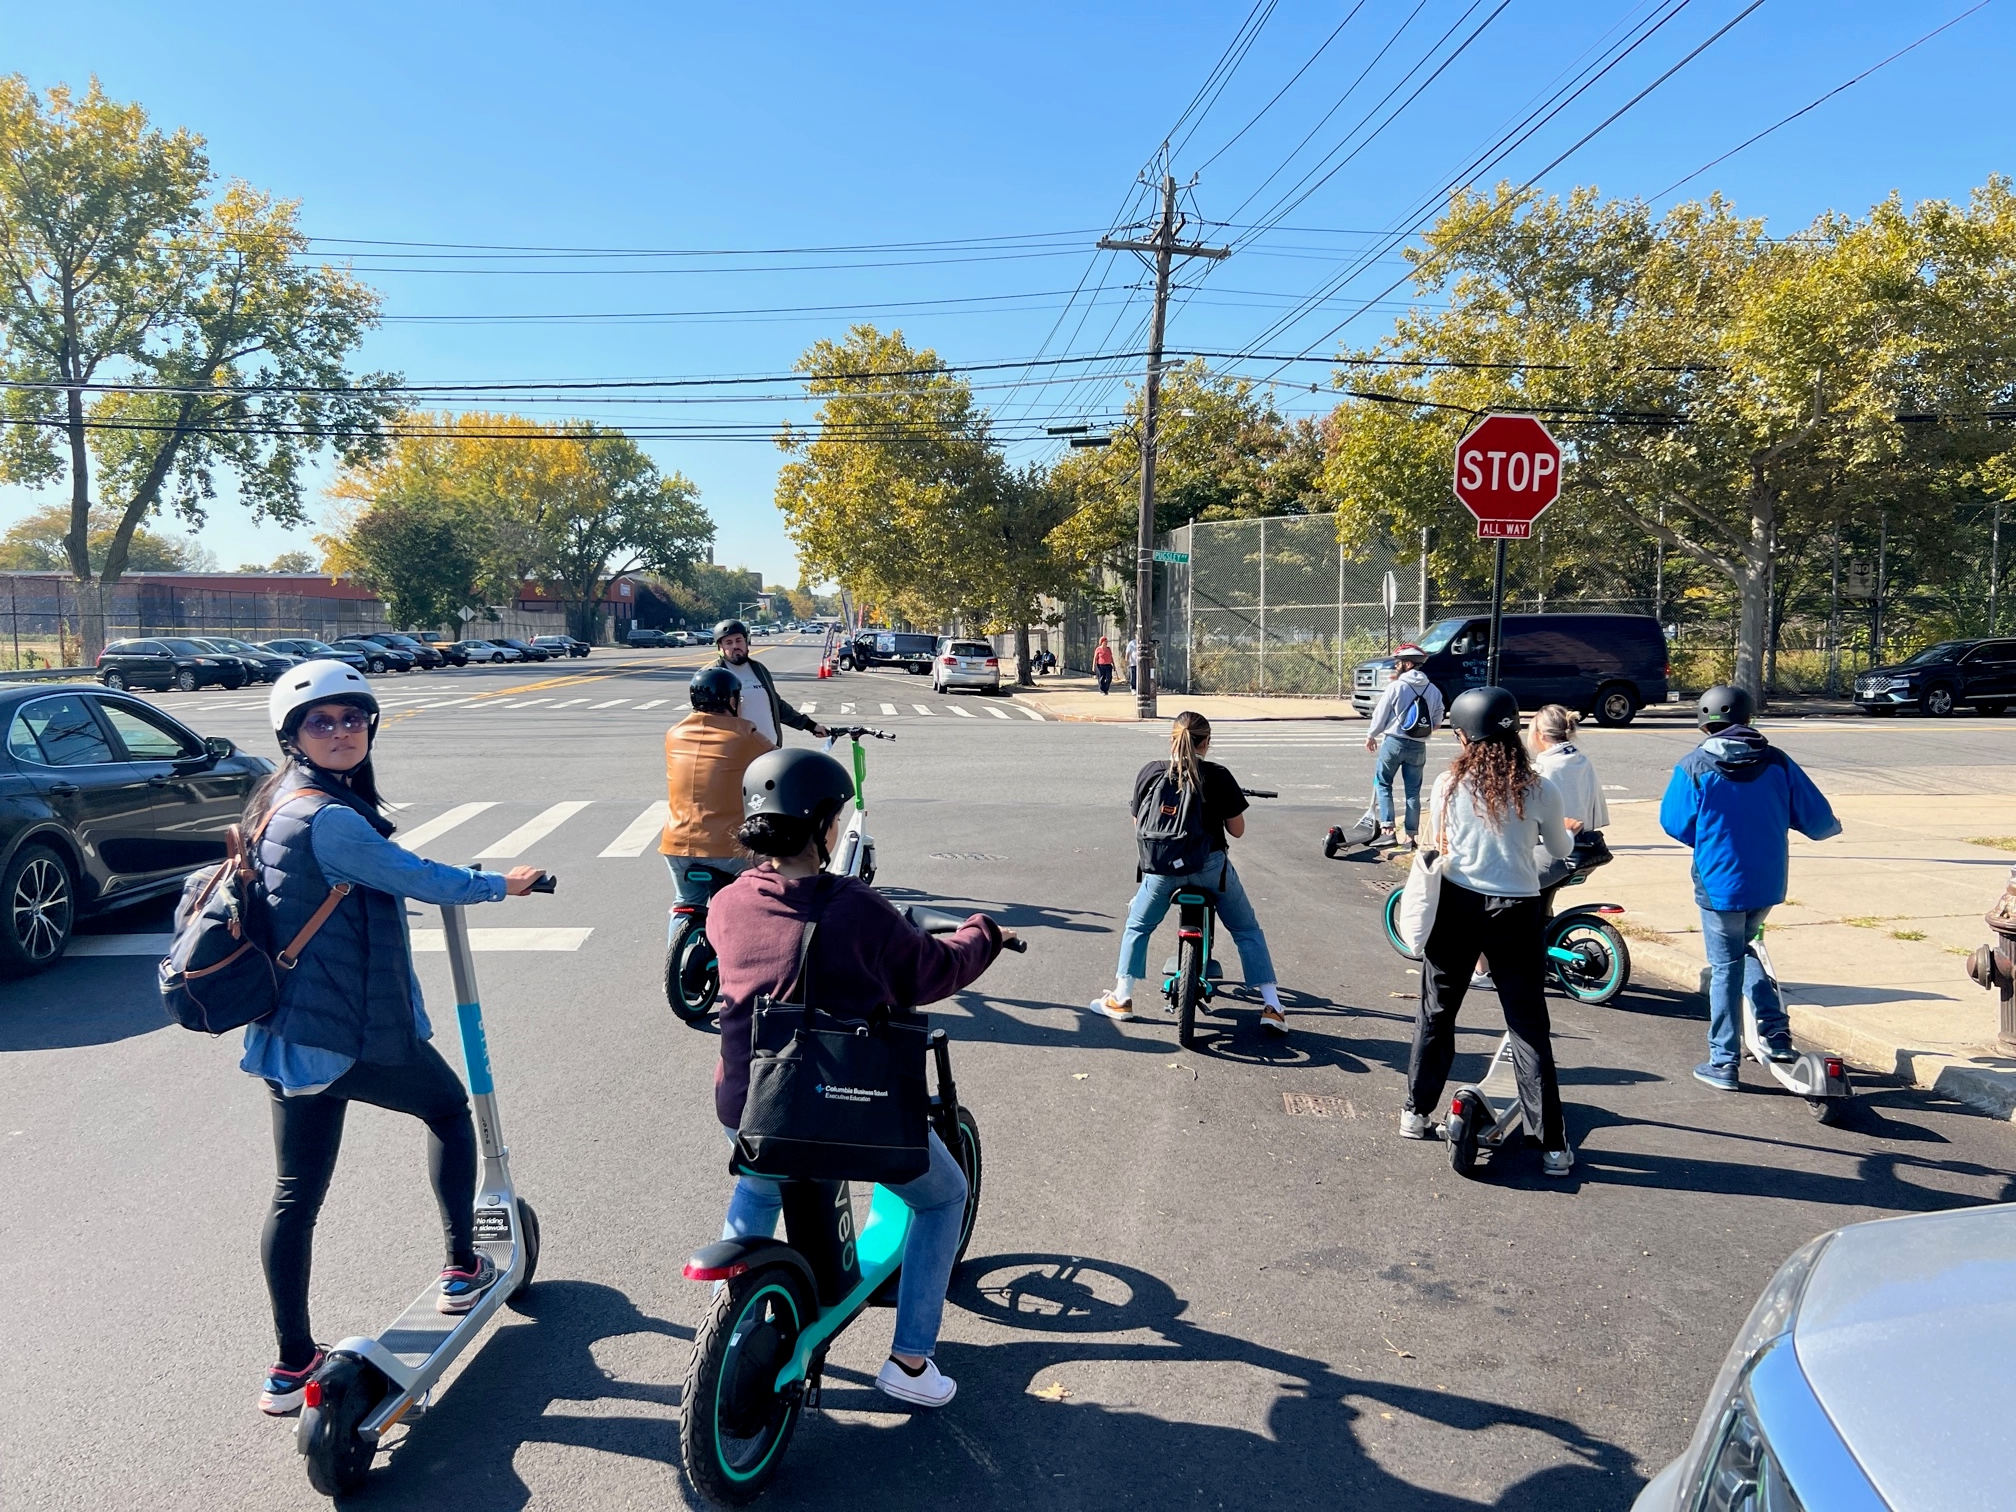 A group of people on e-scooters